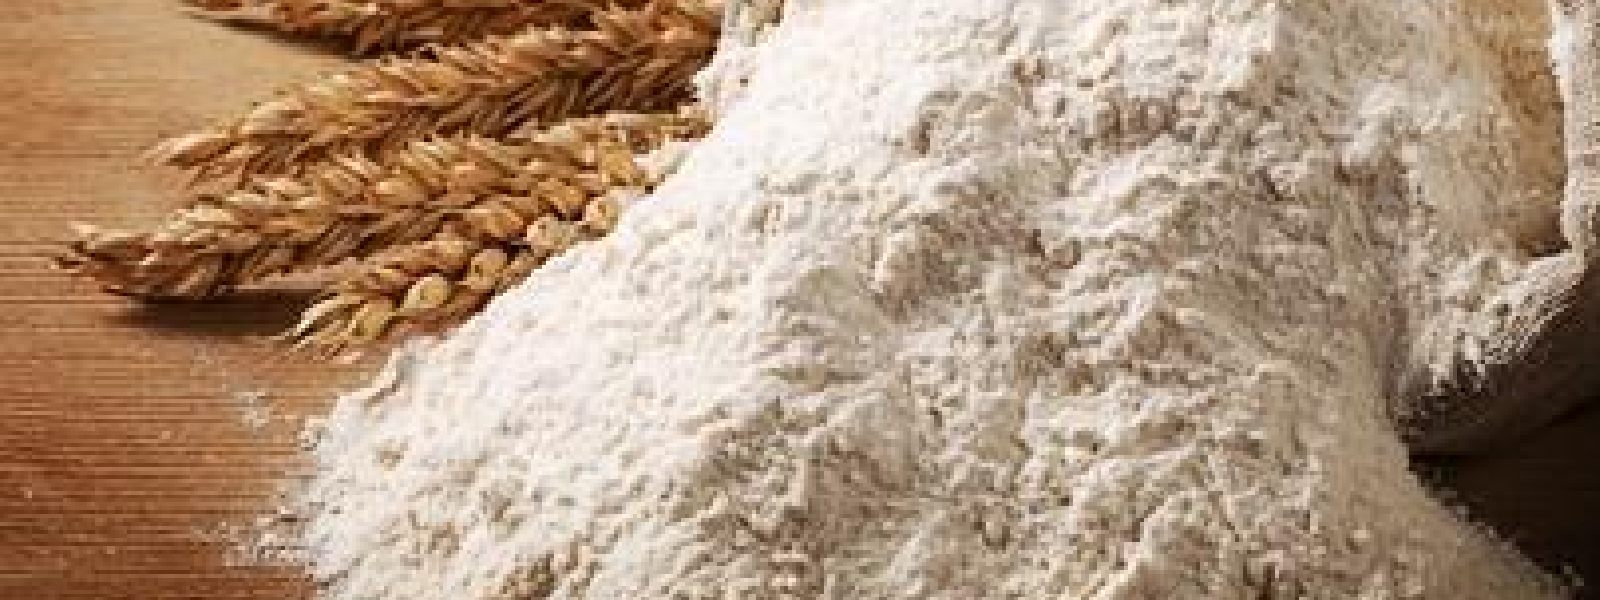 Increase in Import Duty on Wheat Flour Takes Effect